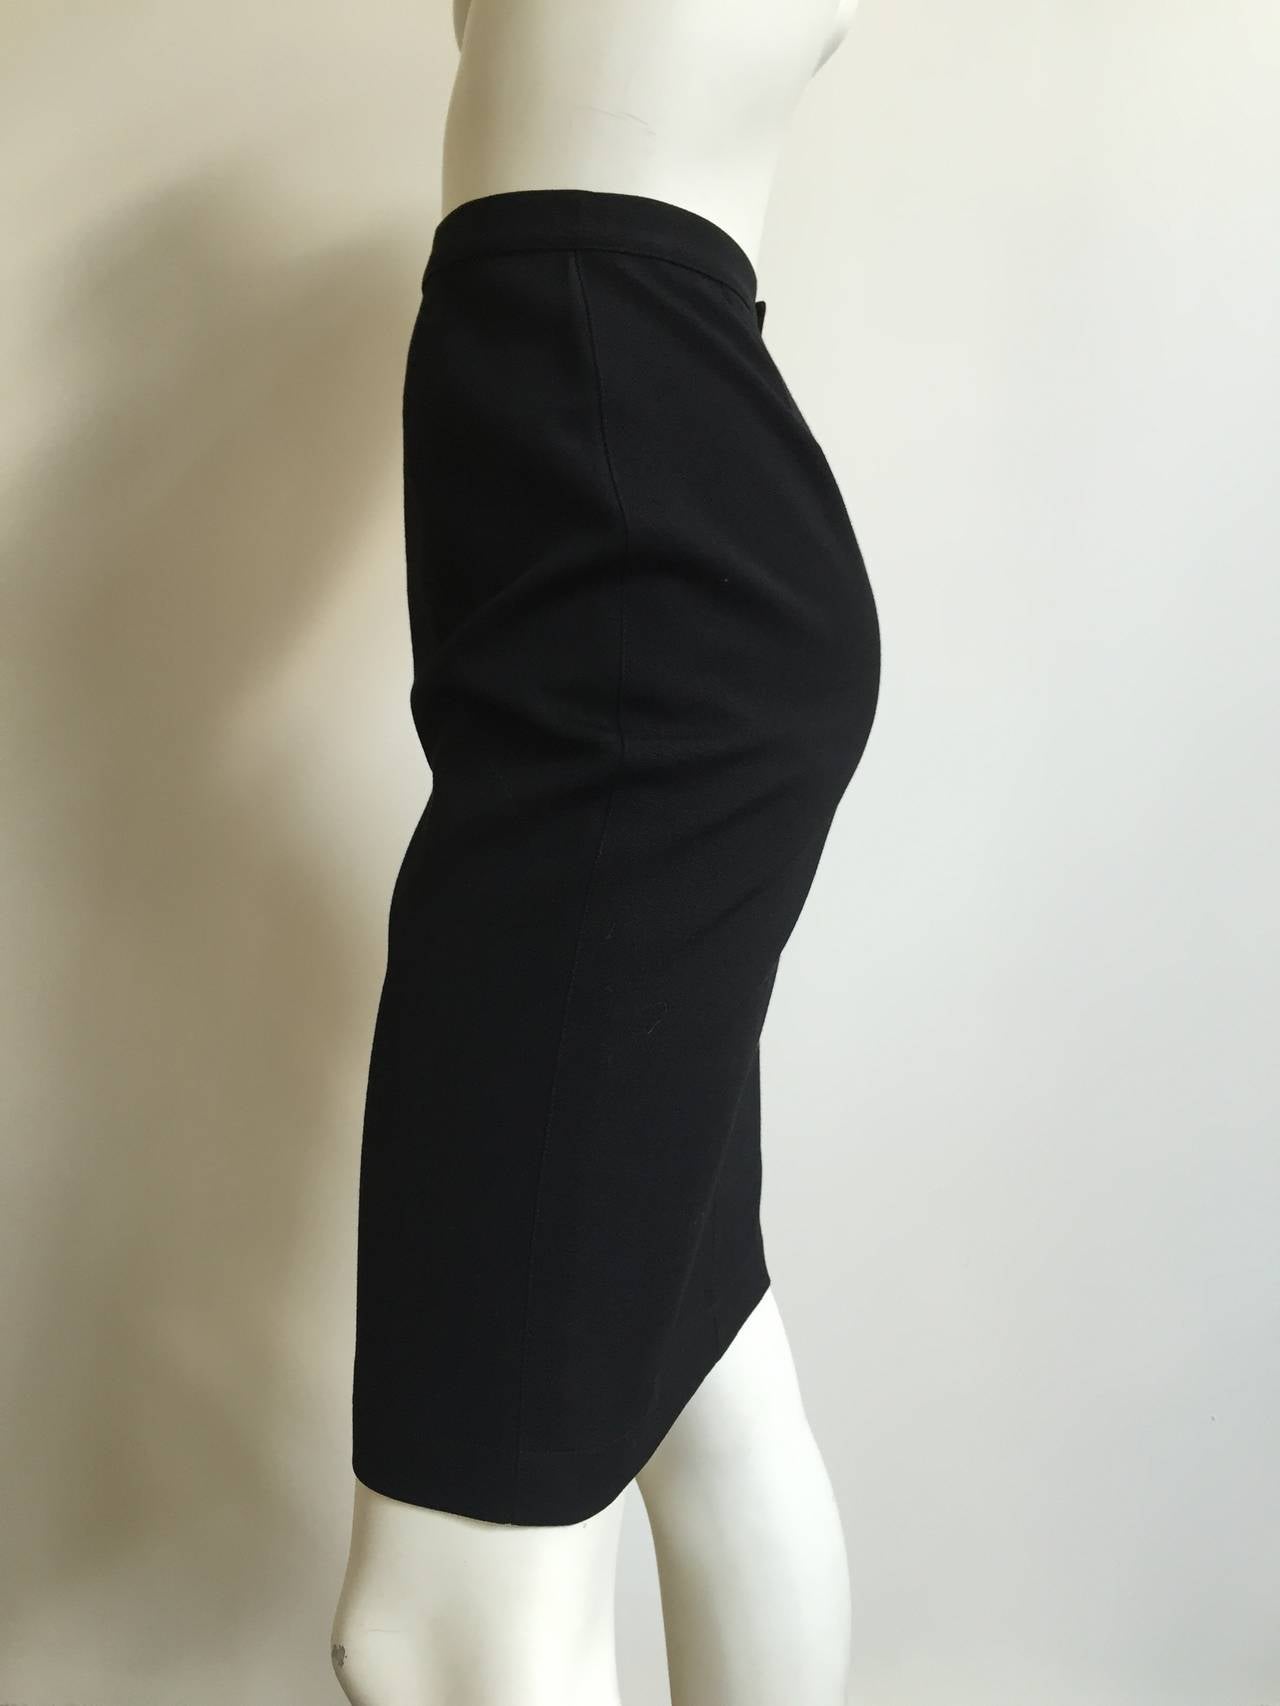 Thierry Mugler 80s flame cut out pencil skirt size 4. 1